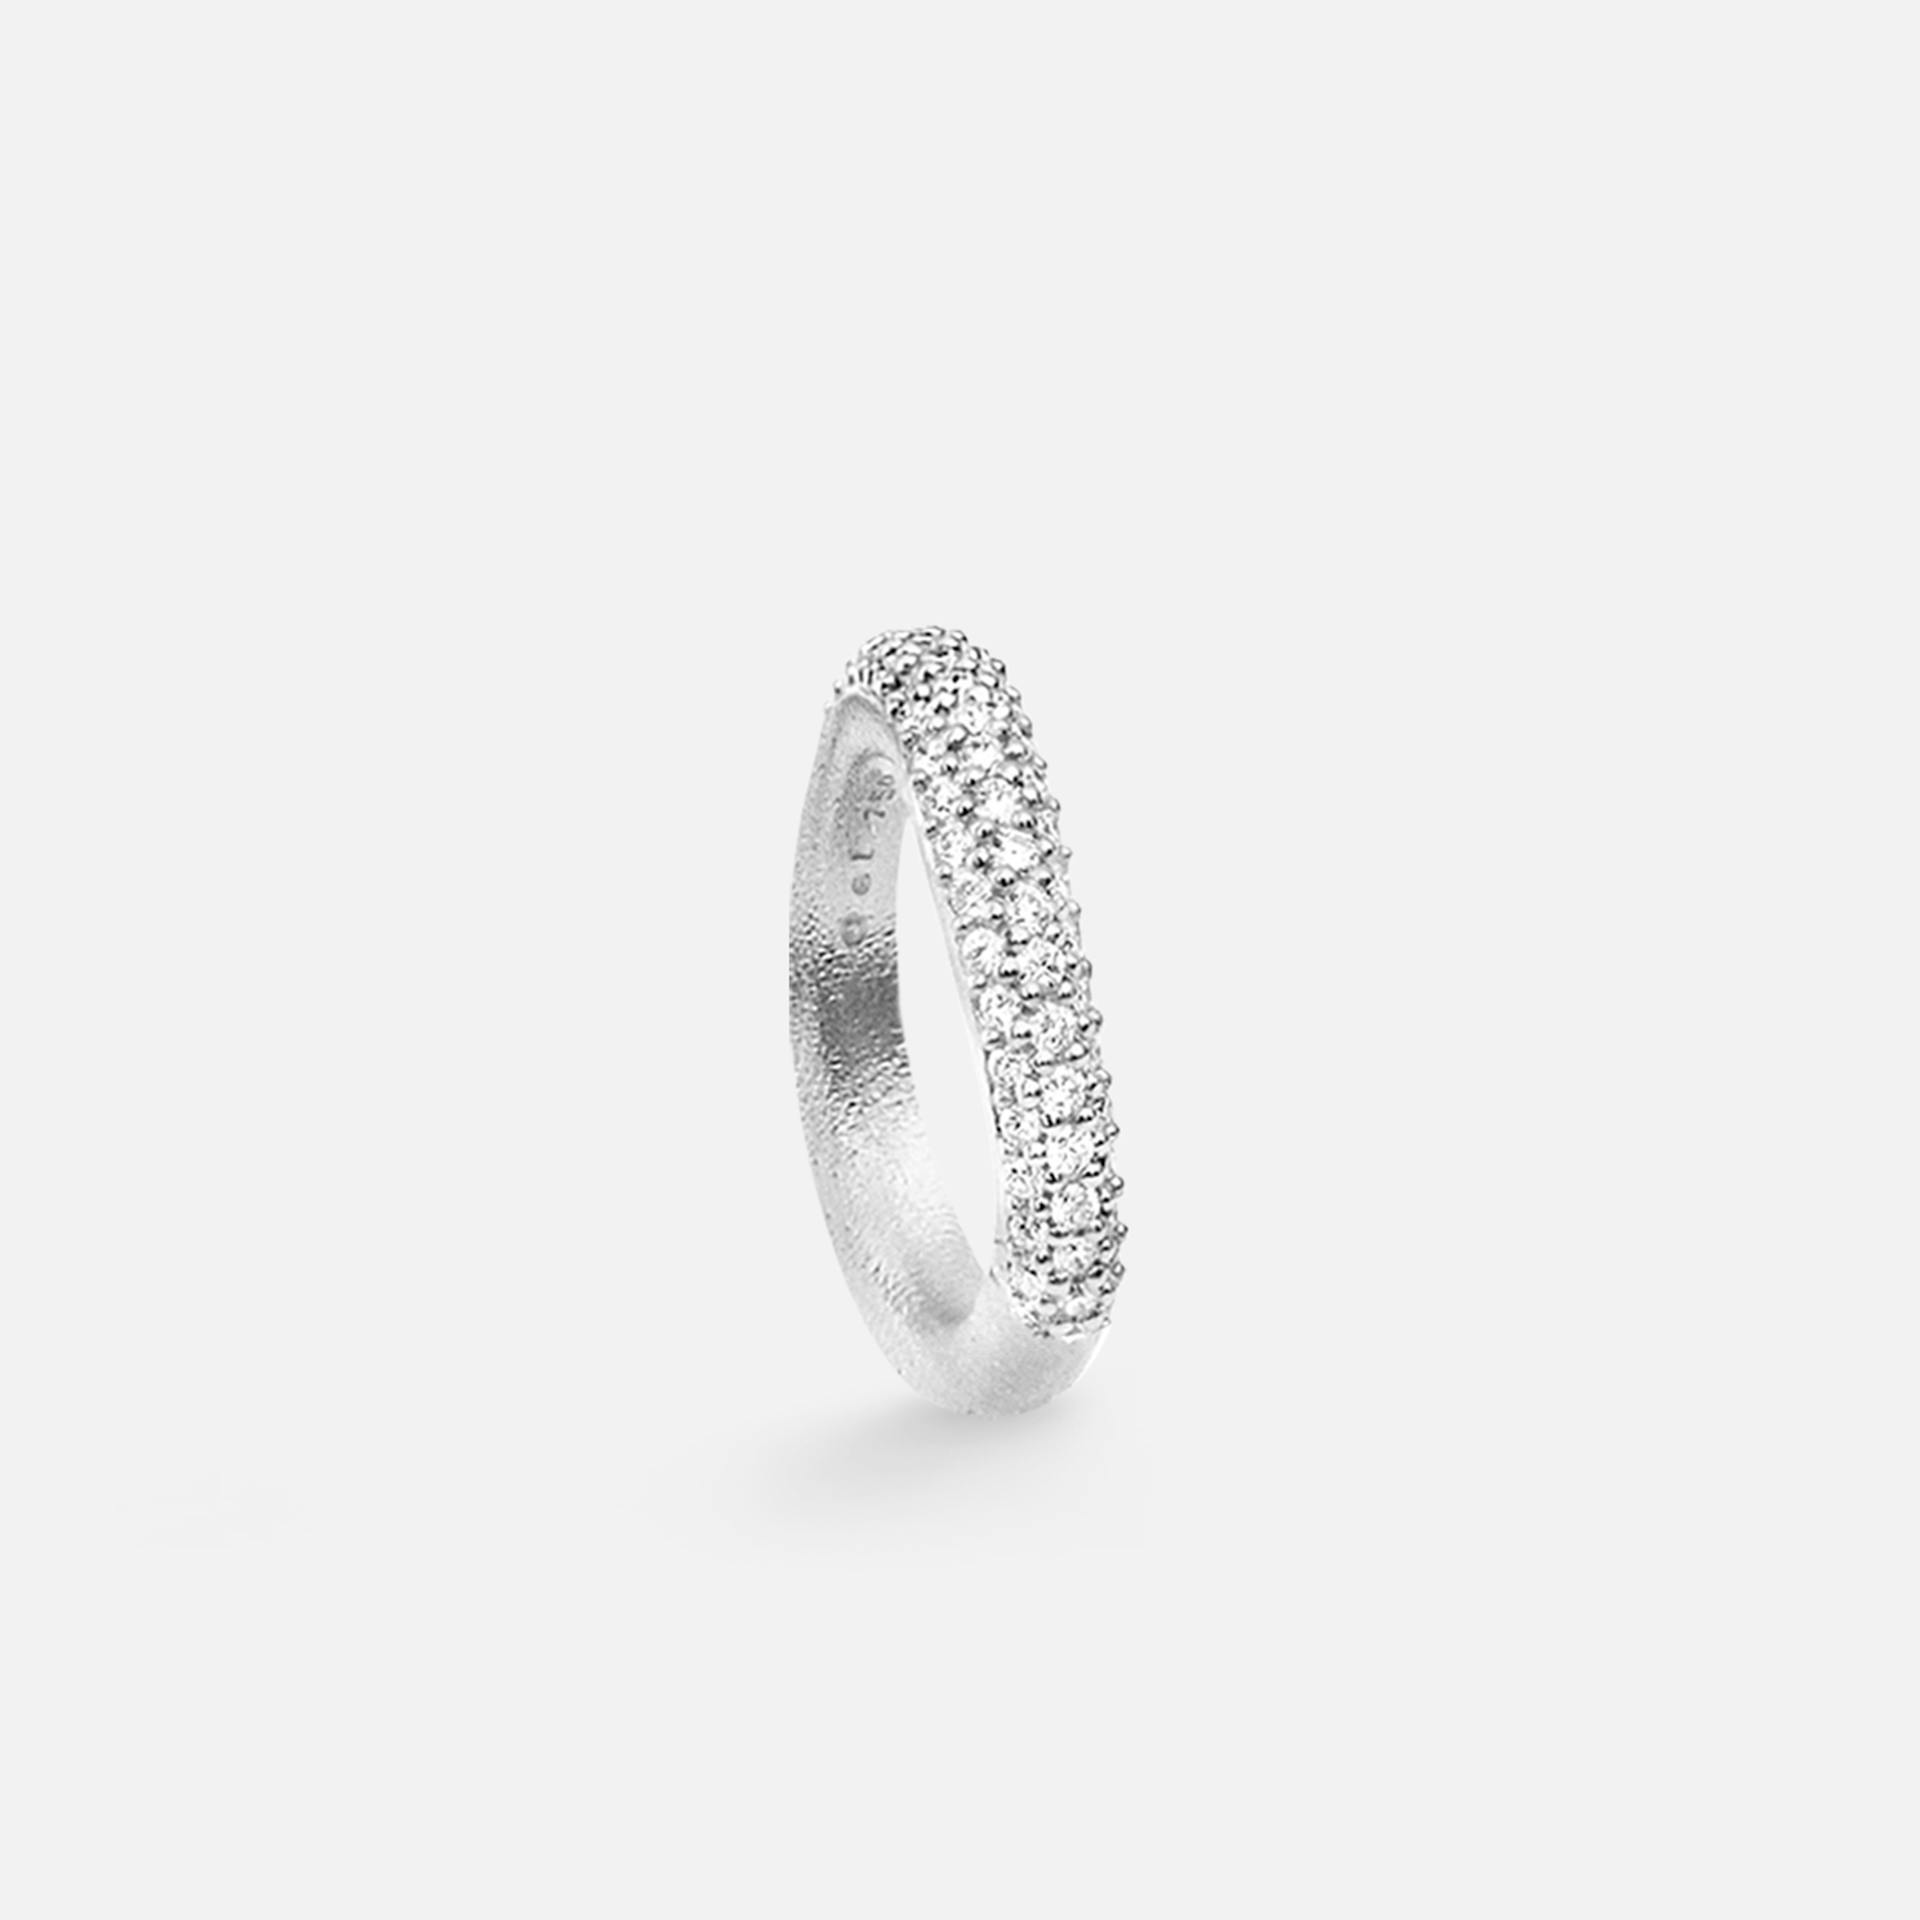 Love ring 4 18k white gold textured and diamonds 0.71 ct. TW. VS.